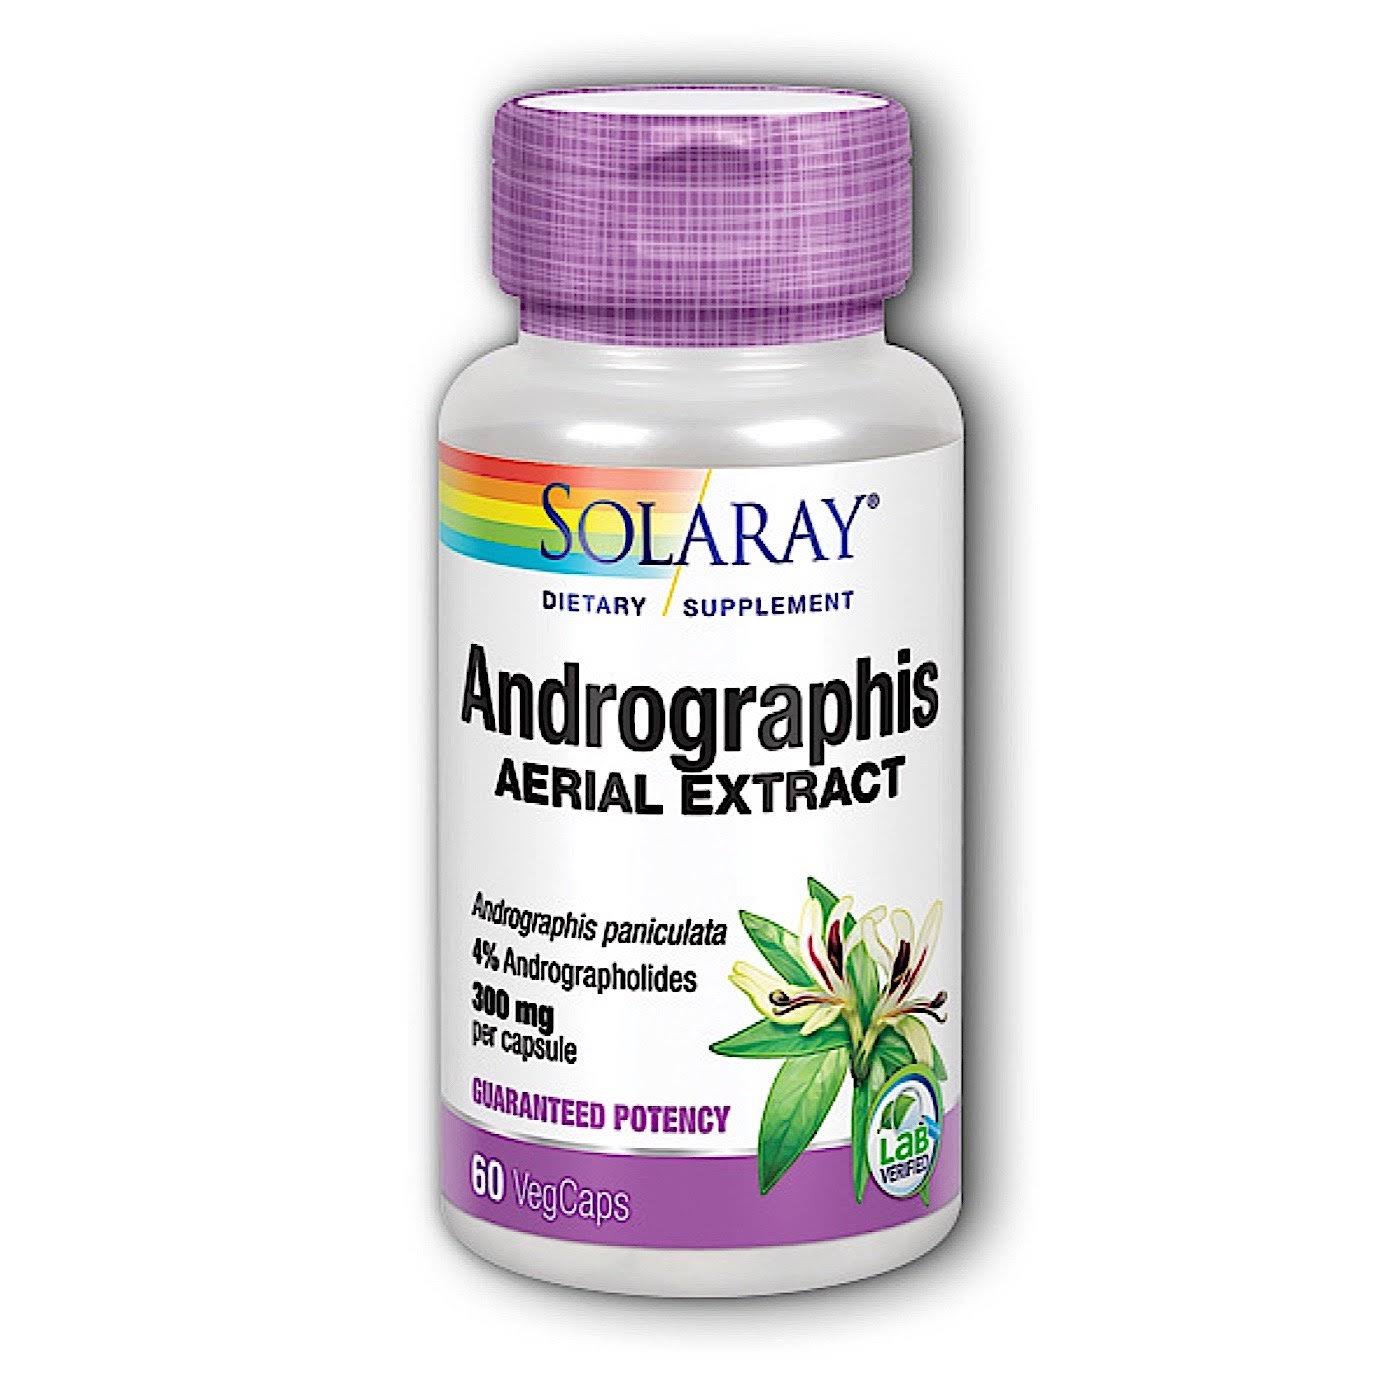 Solaray Andrographis Supplement - 300mg, 60ct